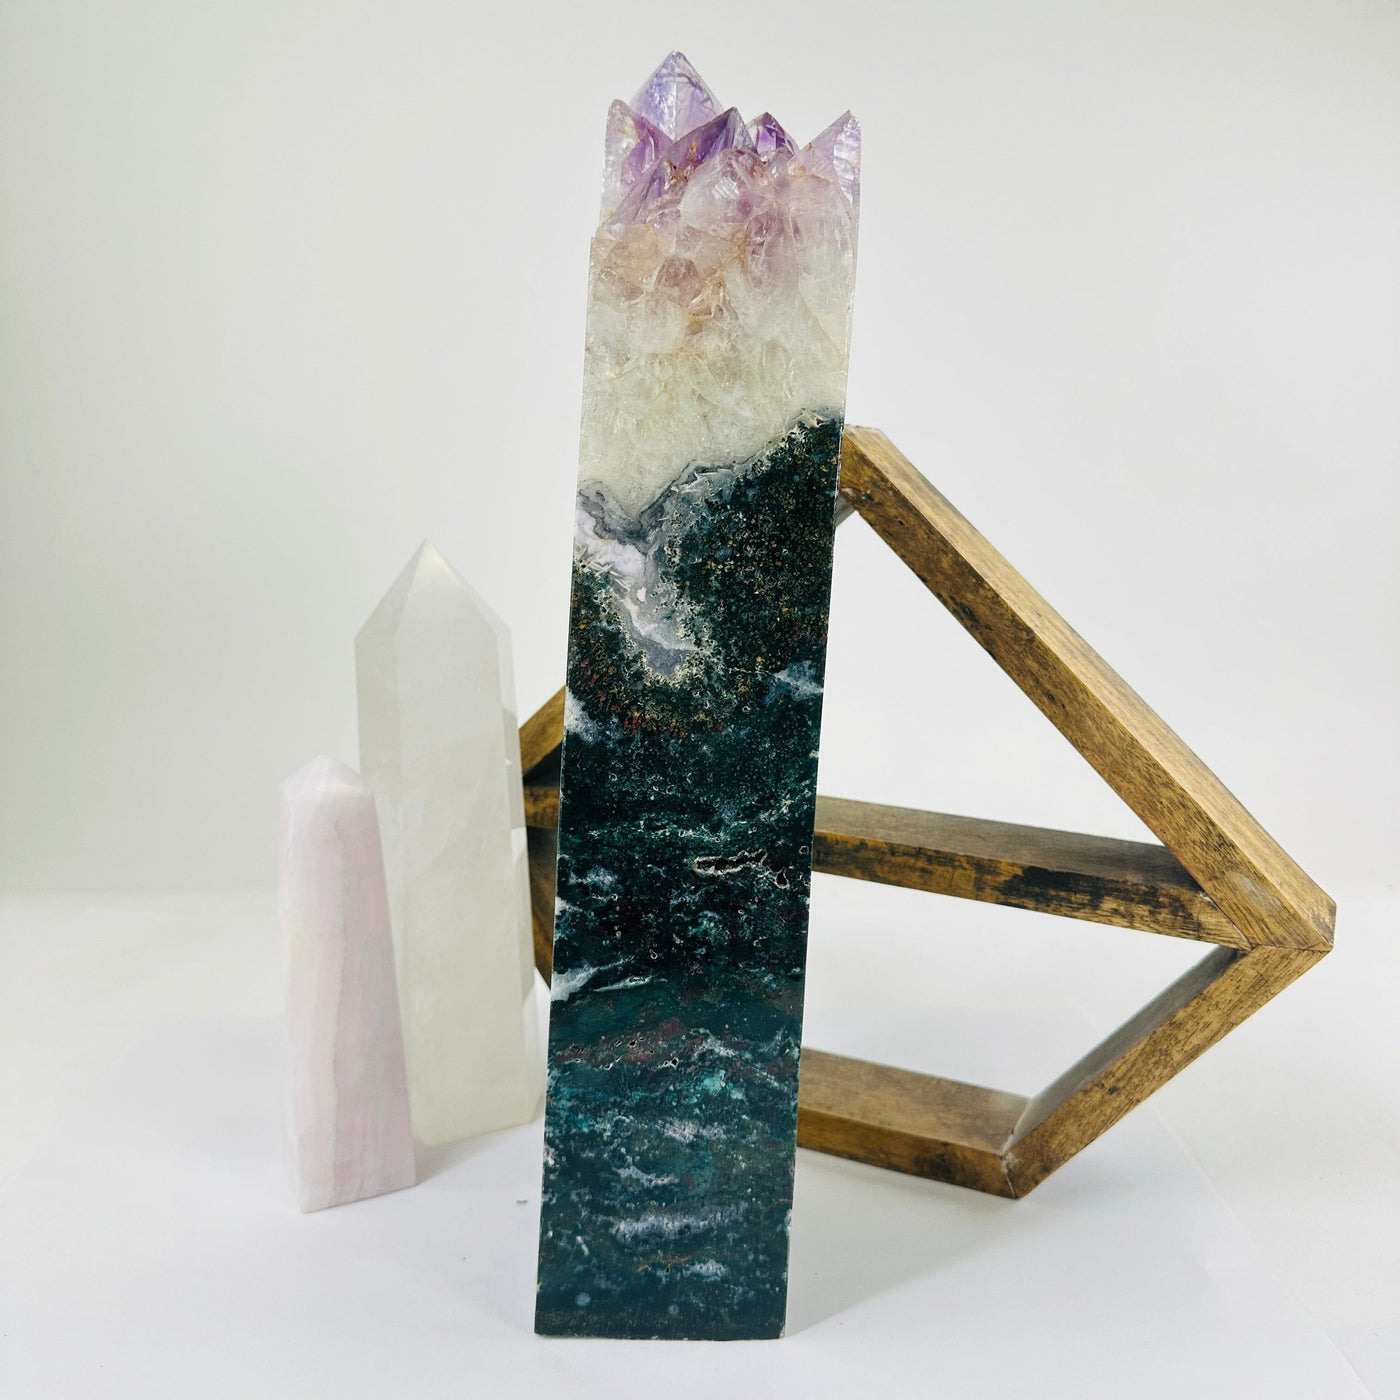 amethyst with jasper with decorations in the background